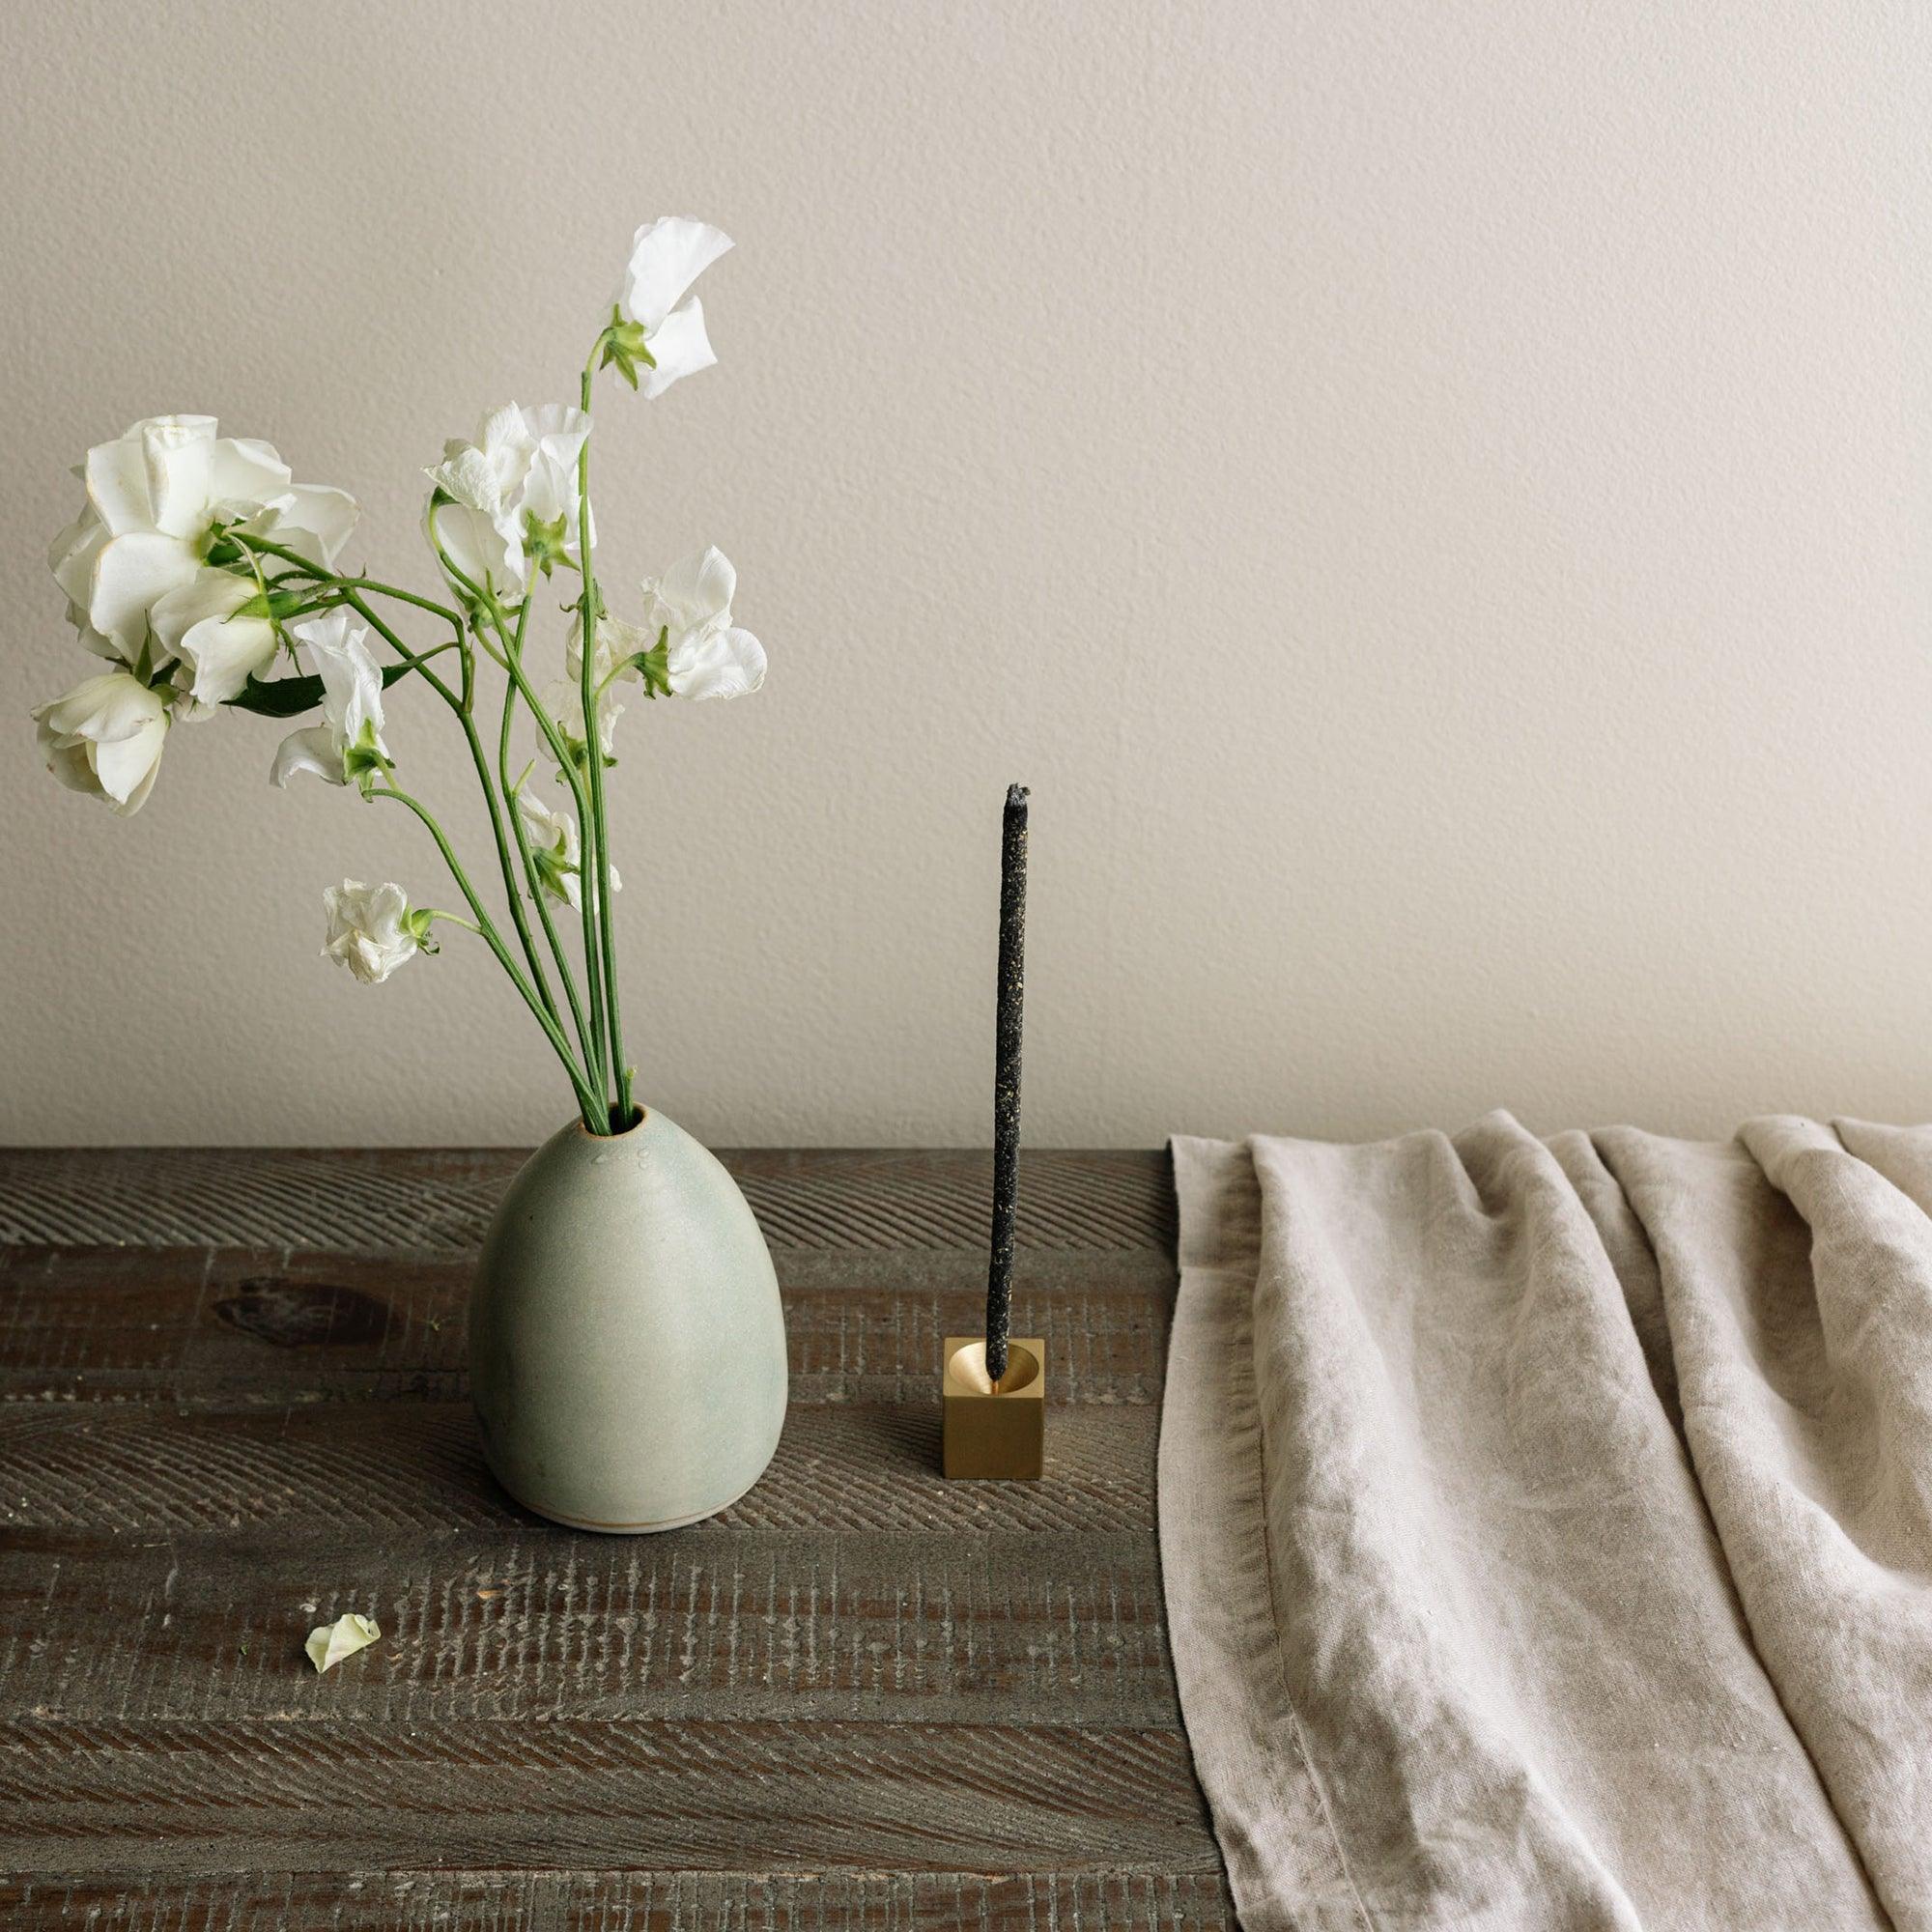 flowers with a vase, incense stick with incense holder, linen cloth on the wooden table